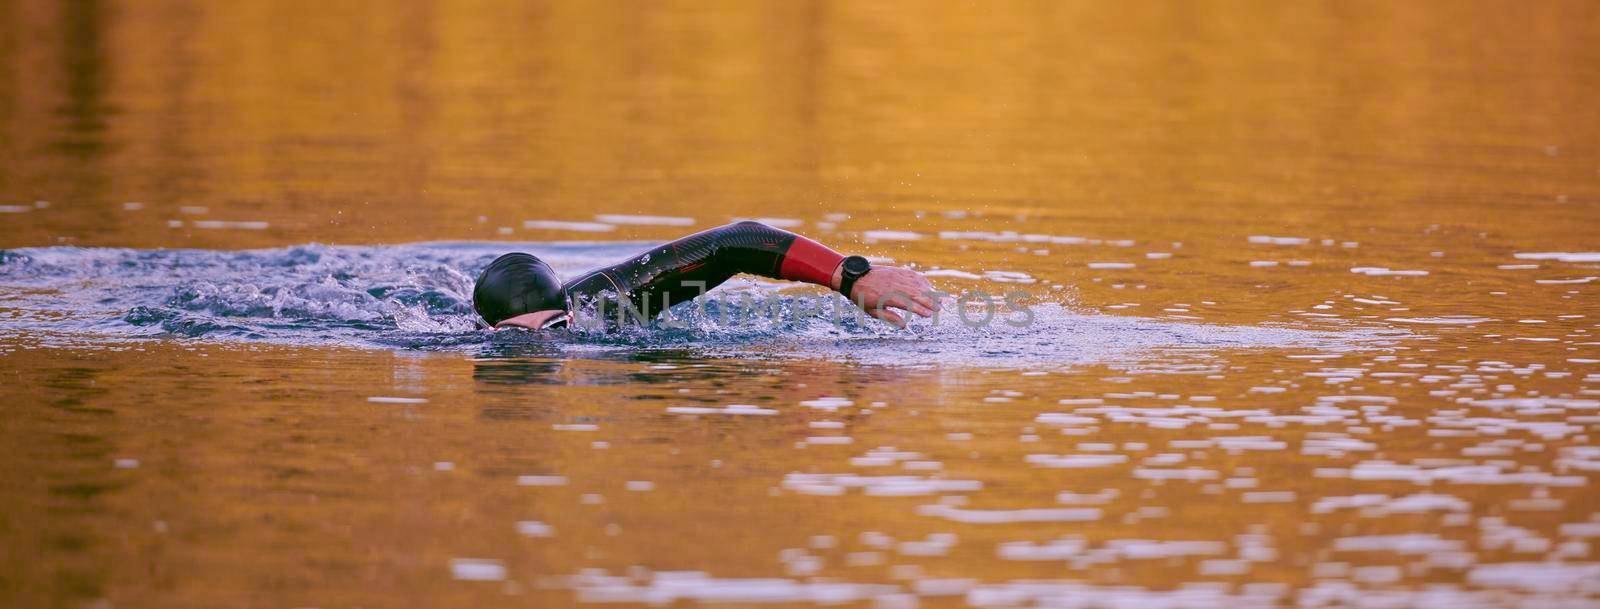 triathlon athlete swimming on beautiful morning sunrise training in lake wearing wetsuit concept of strength and endurance